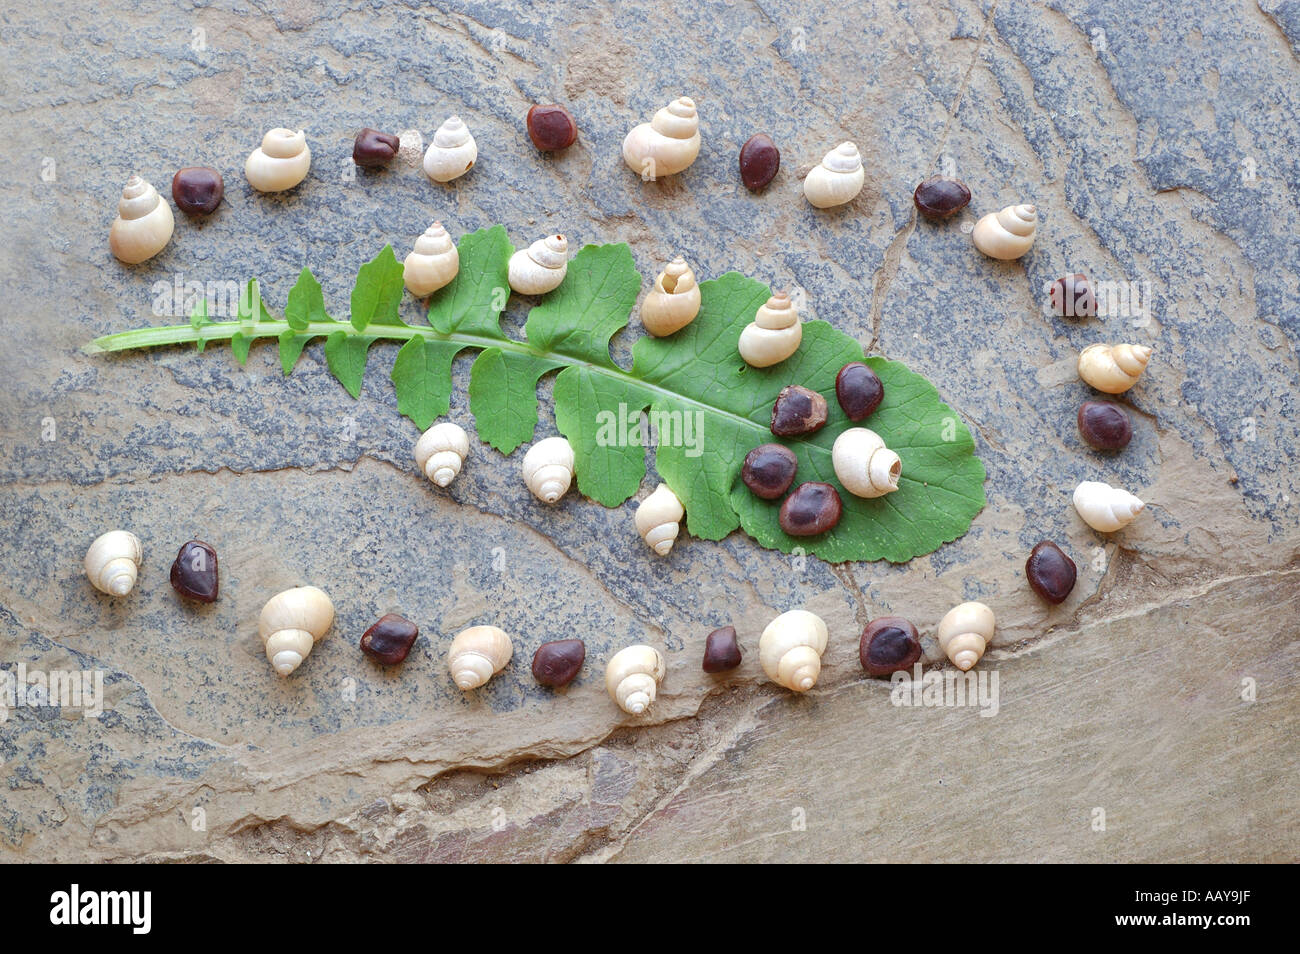 SDM78692 Design made out of sea shells stones and leaf India Stock Photo